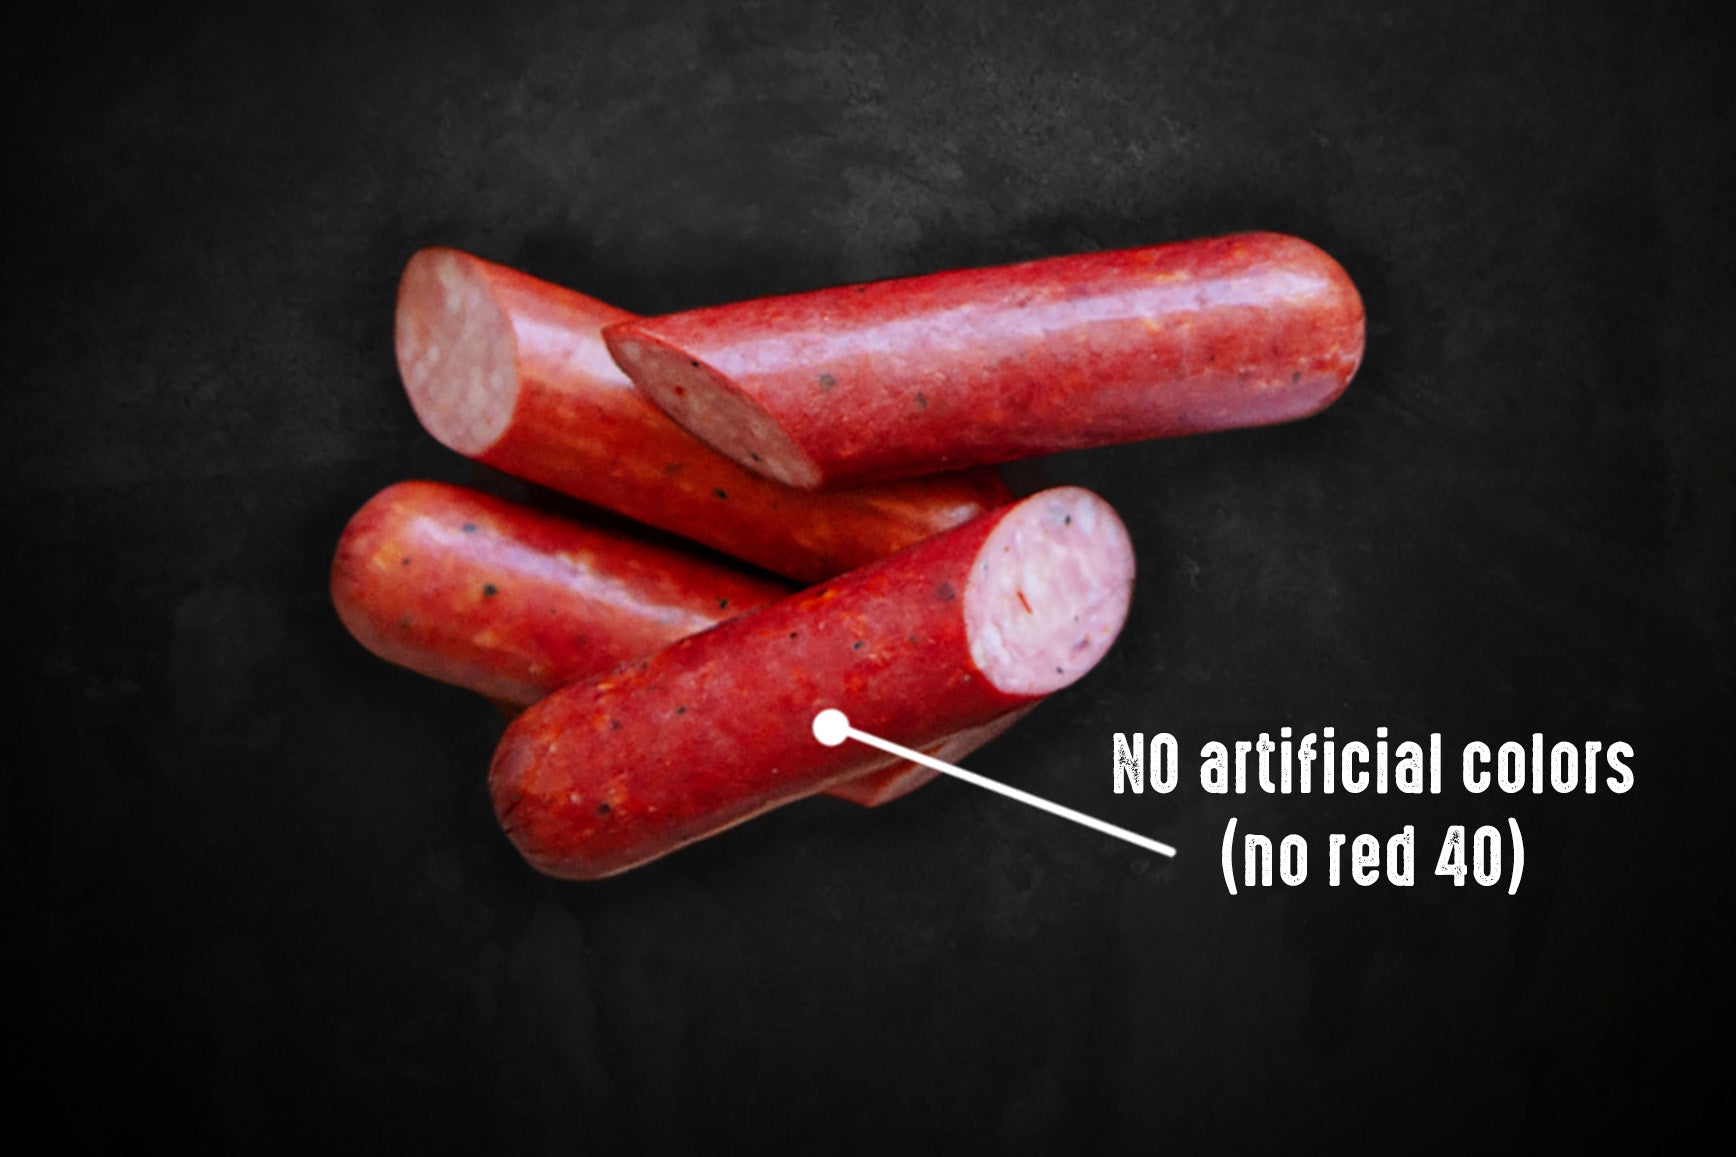 Red 40: Is it Bad for You? - The Nutrition Insider